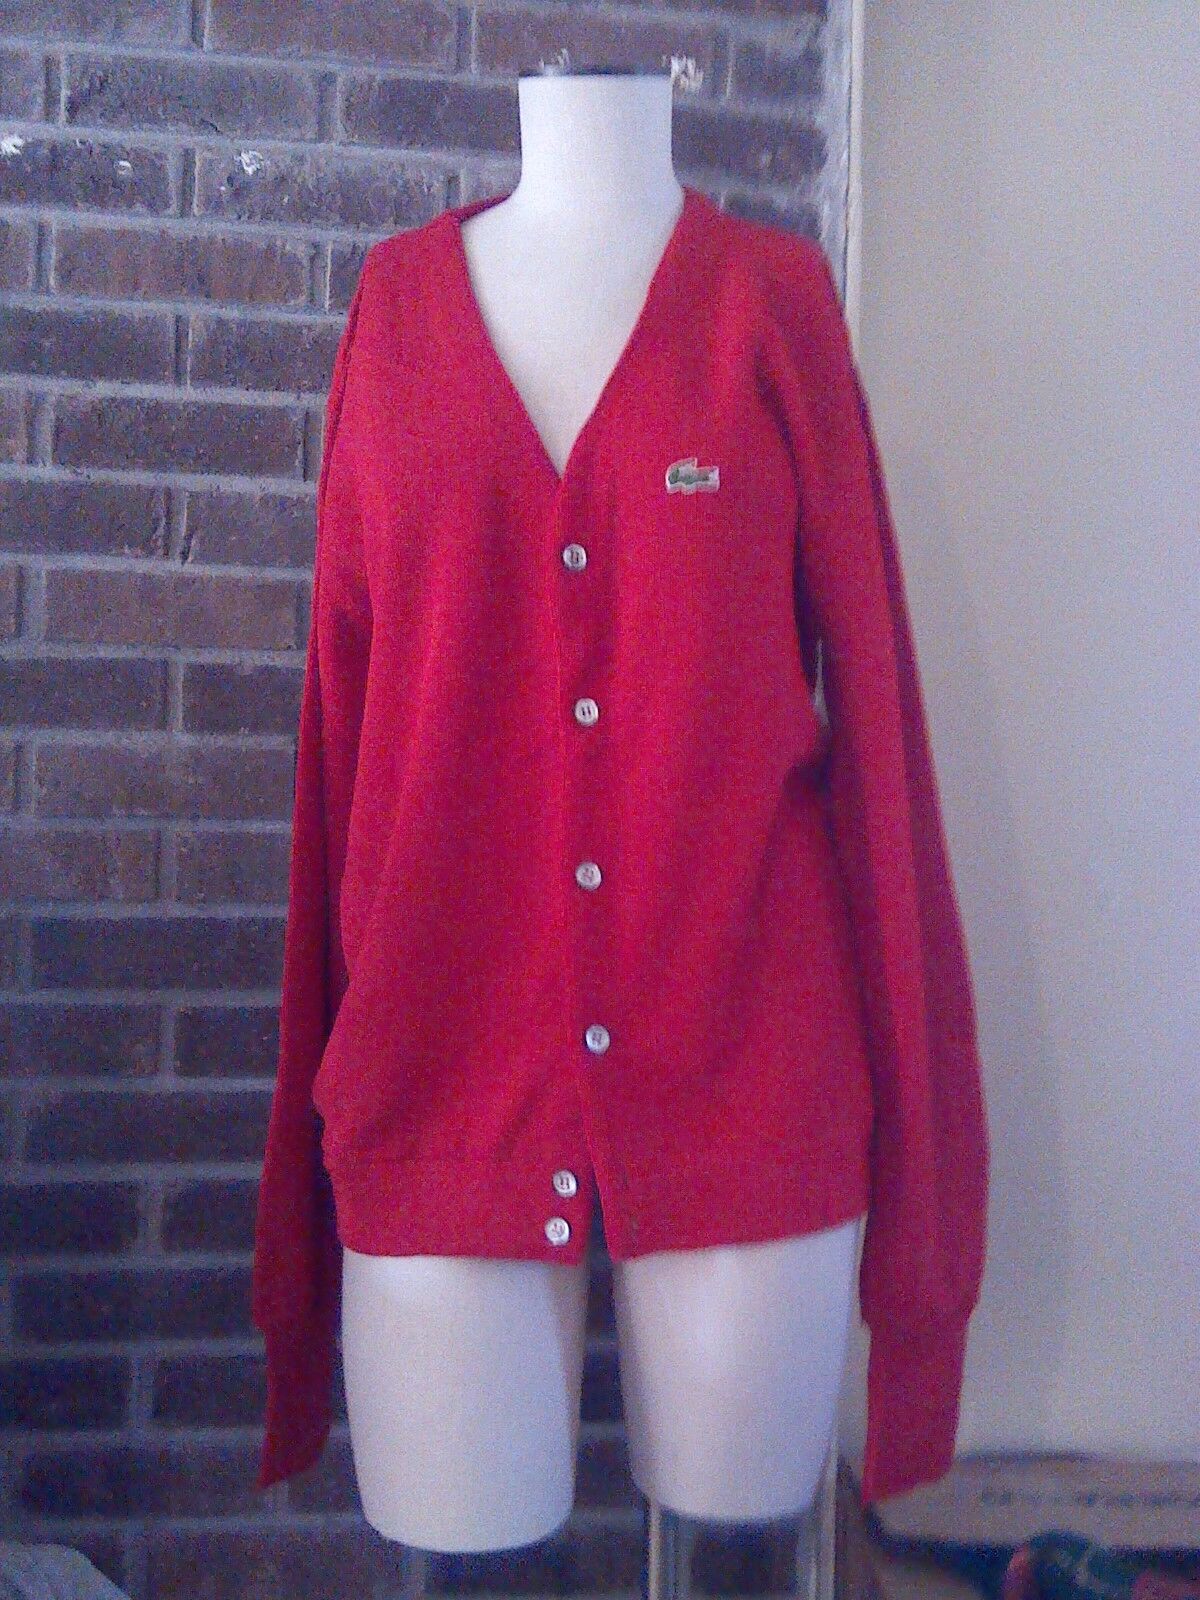  Vintage Izod Lacoste Men\'s Red Button-Up Cardigan++MADE IN U.S.A.